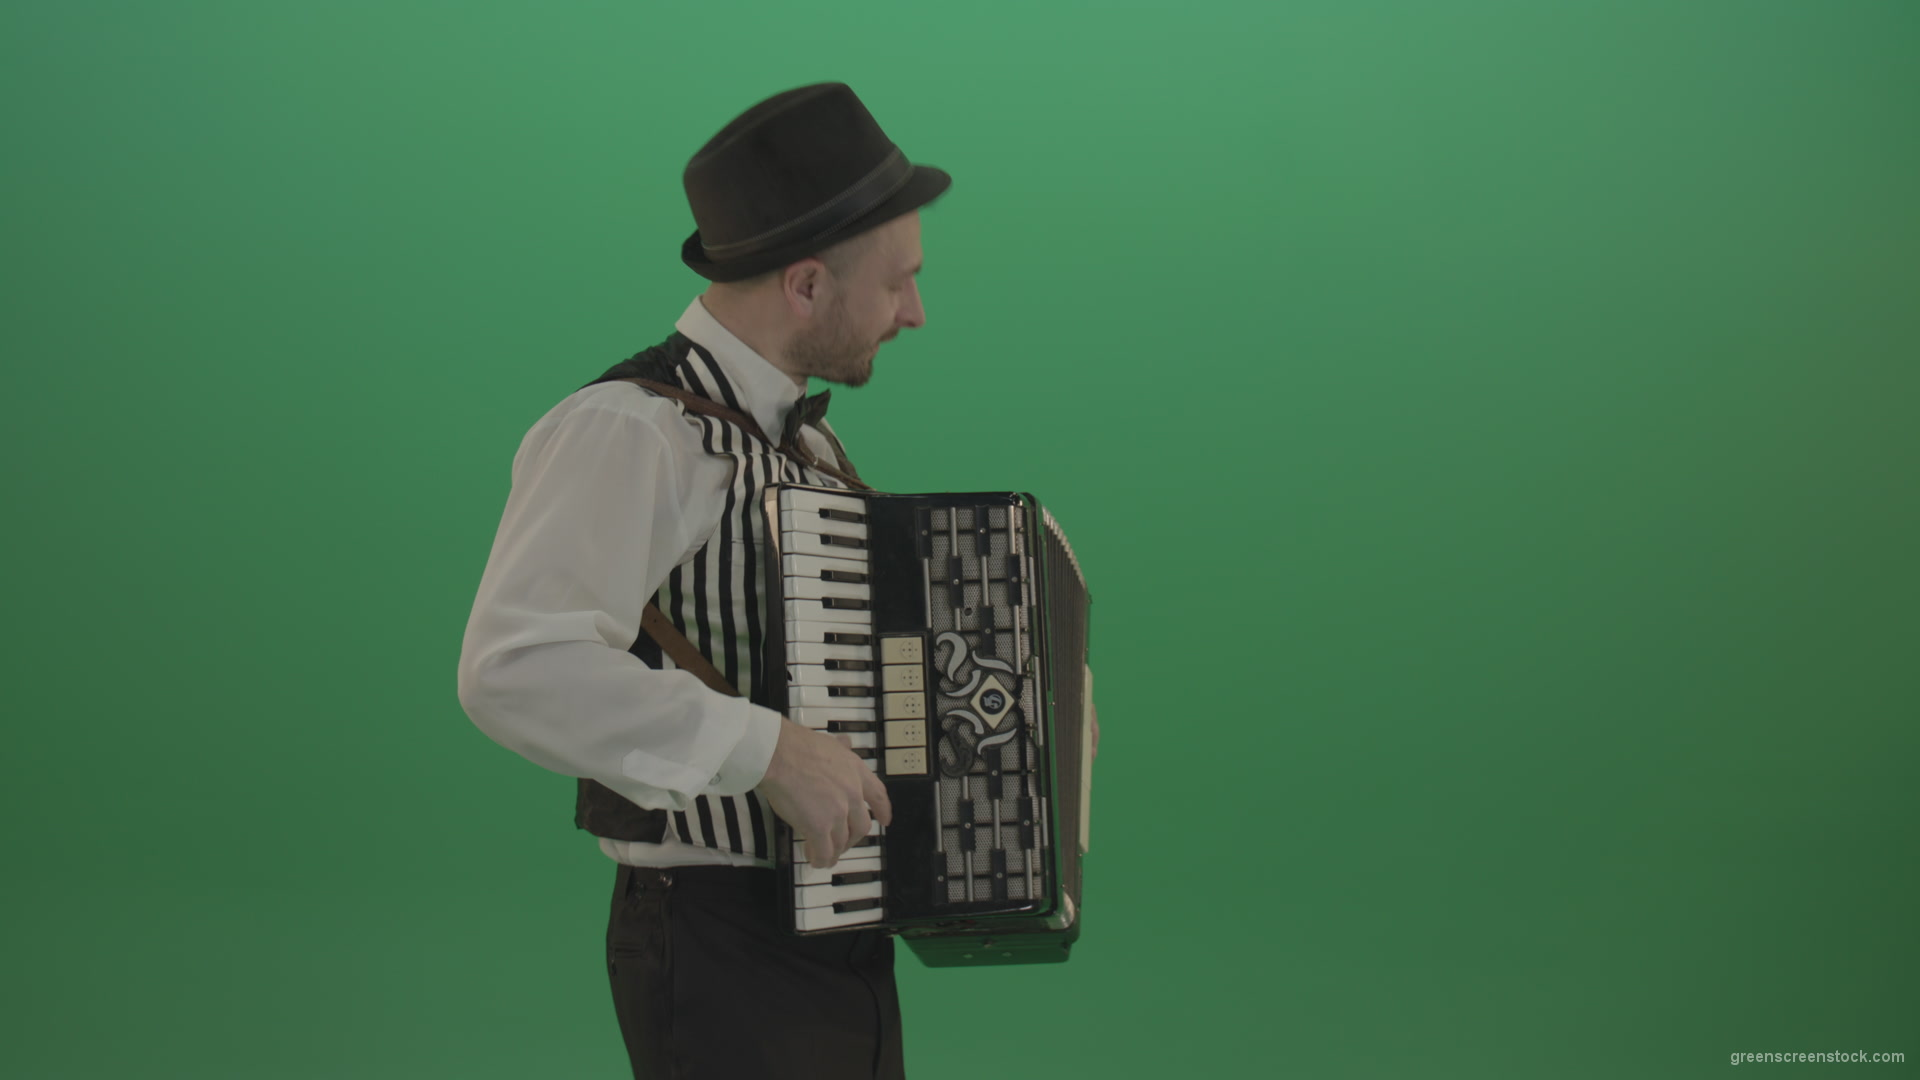 Man-in-hat-playing-Accordion-jazz-music-on-wedding-in-side-view-isolated-on-green-screen_006 Green Screen Stock